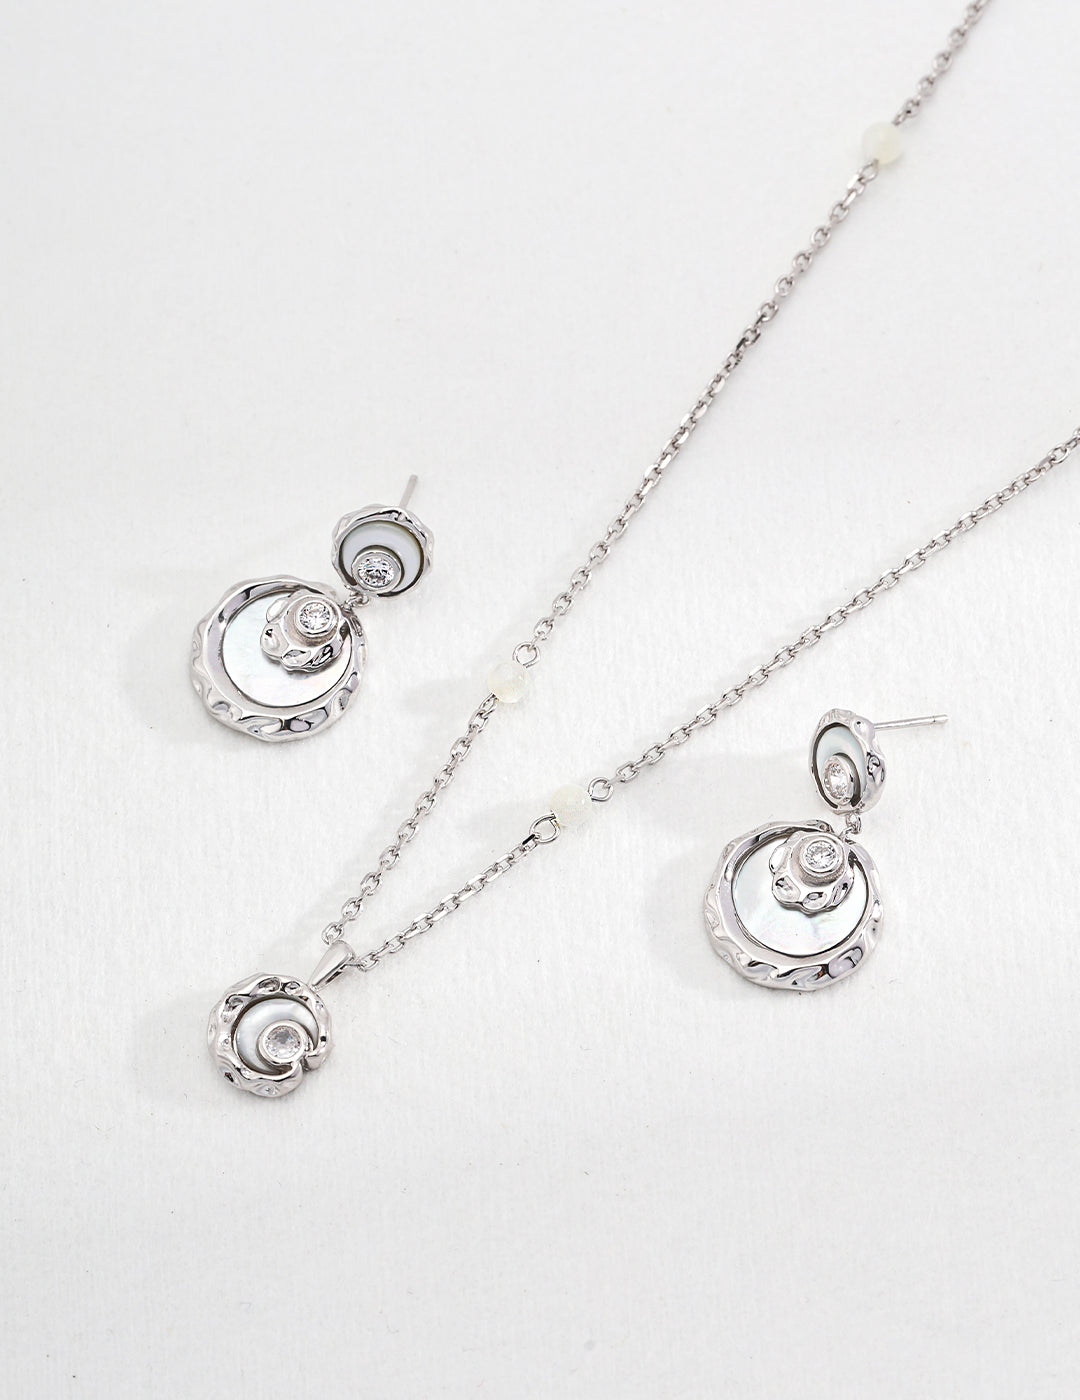 Silver Elegant Necklace and Earrings Set with Mother of Pearl and Cubic Zirconia